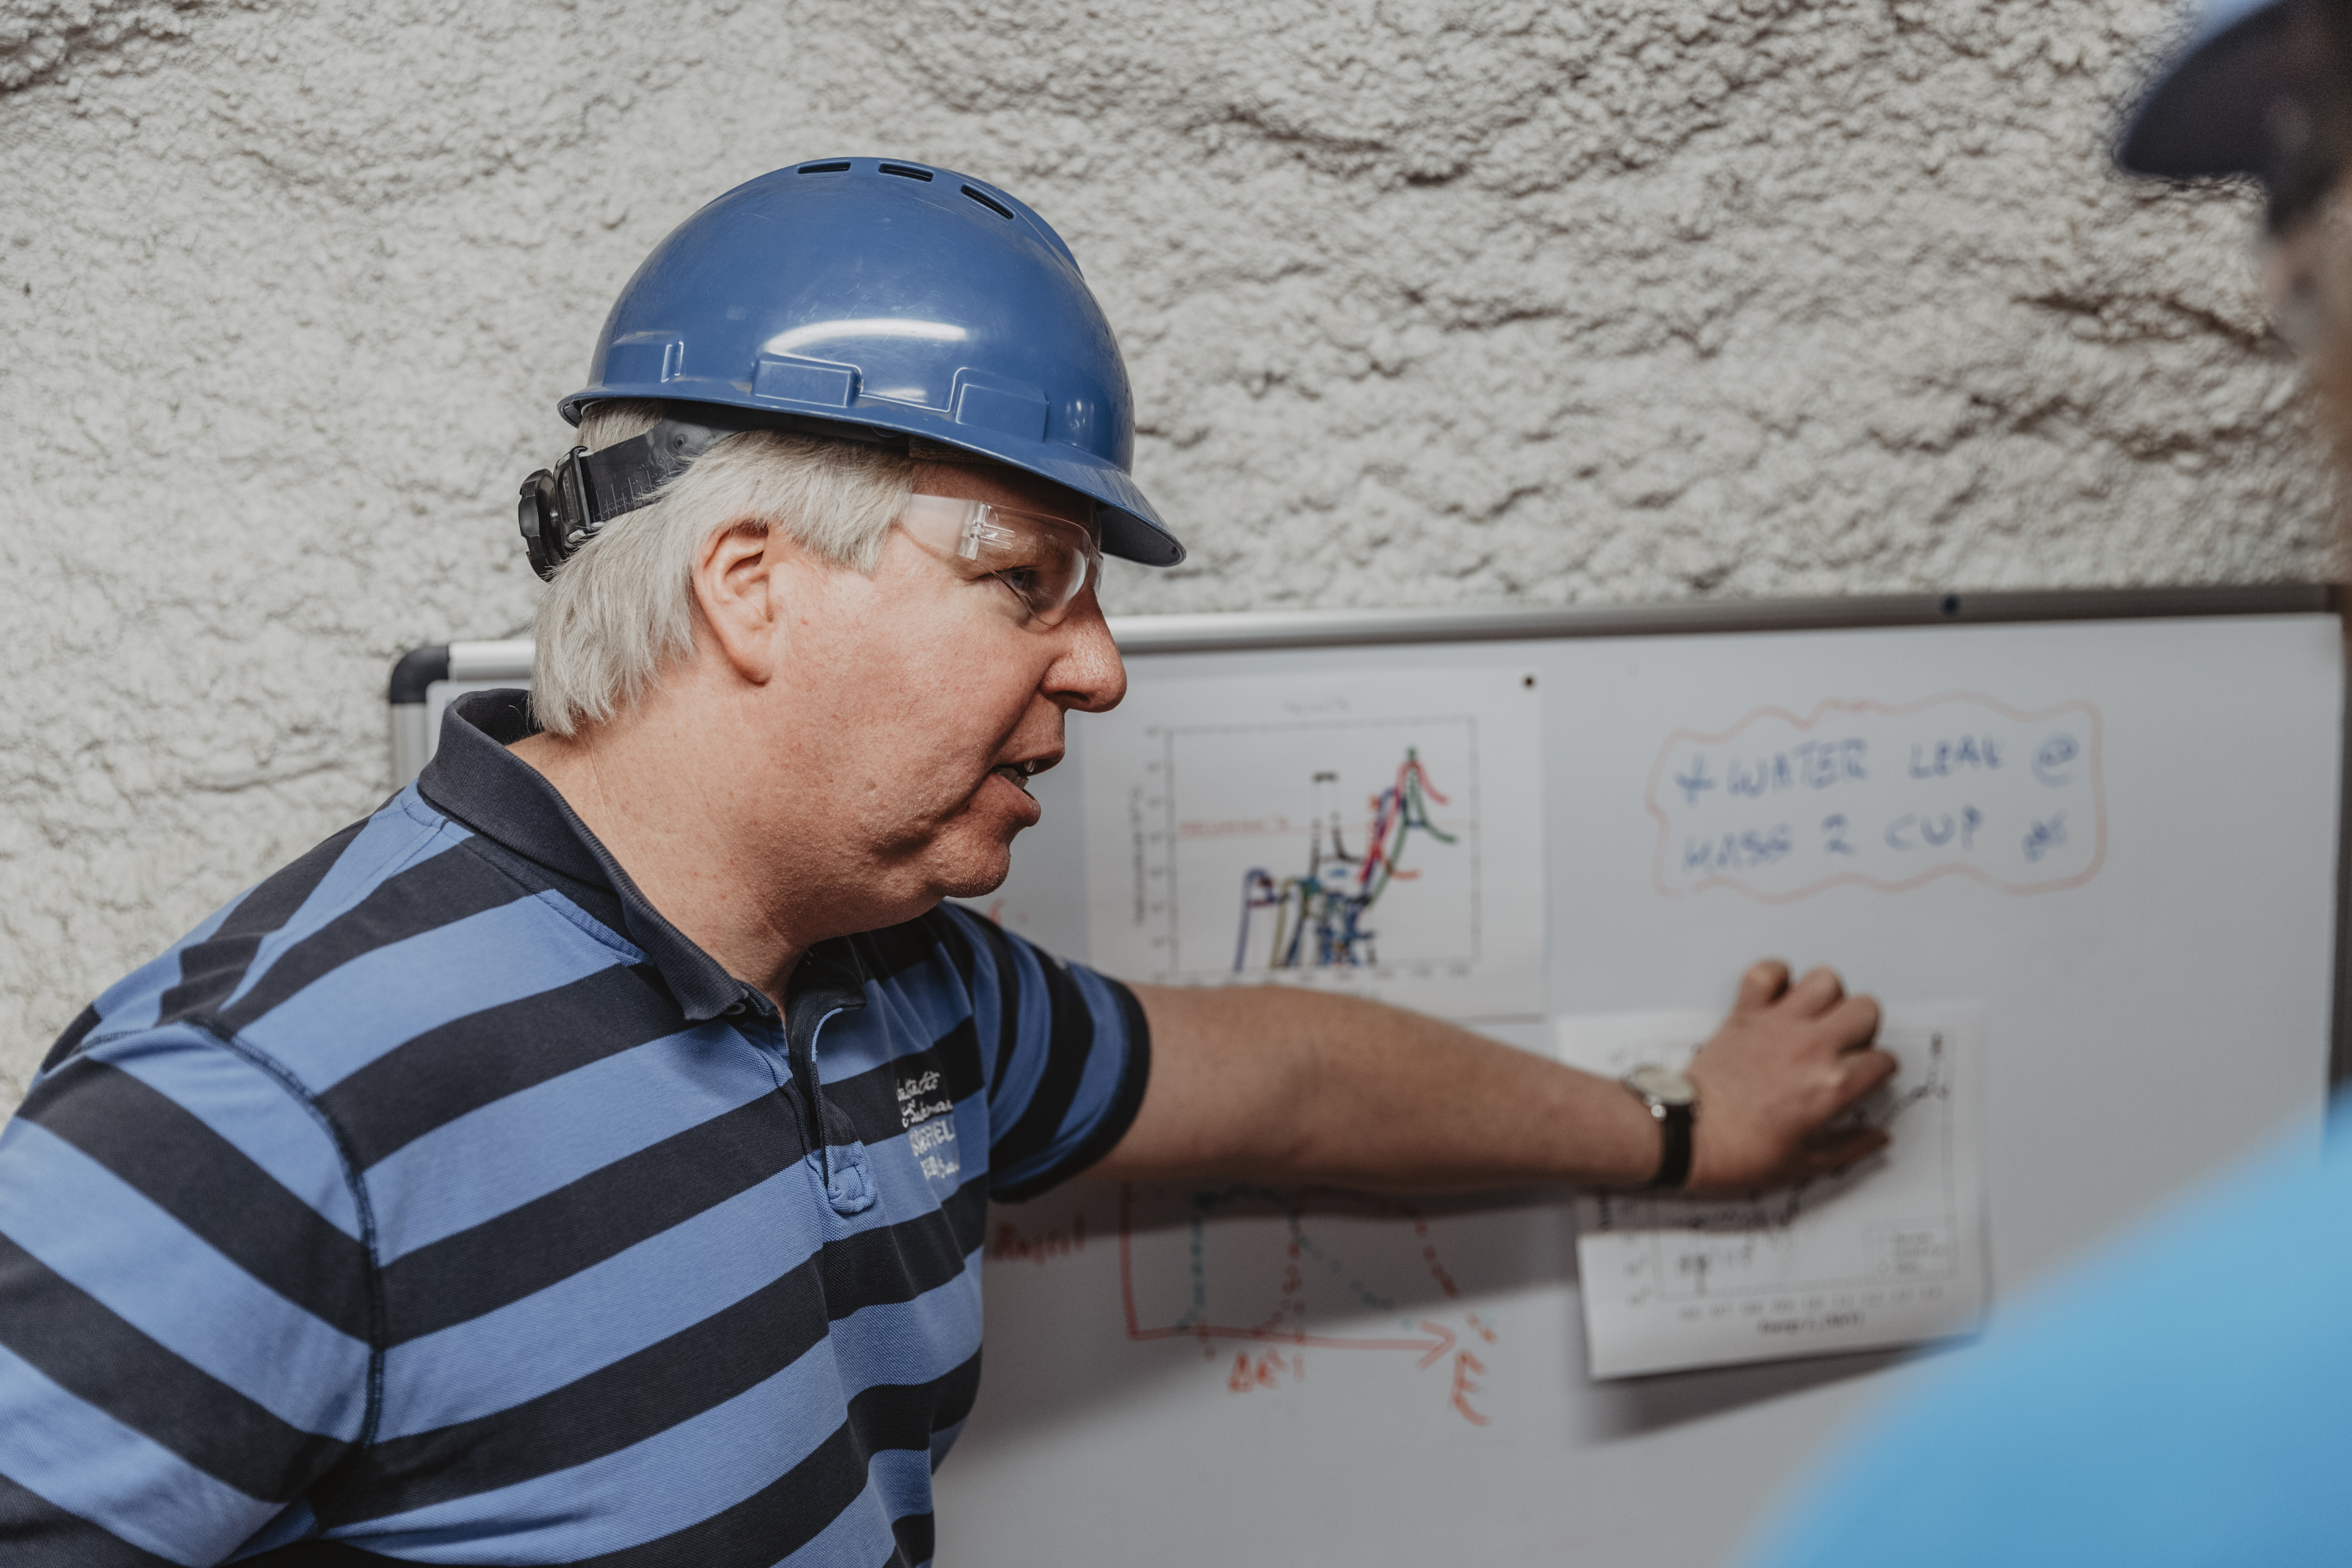 A researcher in a hard hat and safety glasses points to chart on the wall